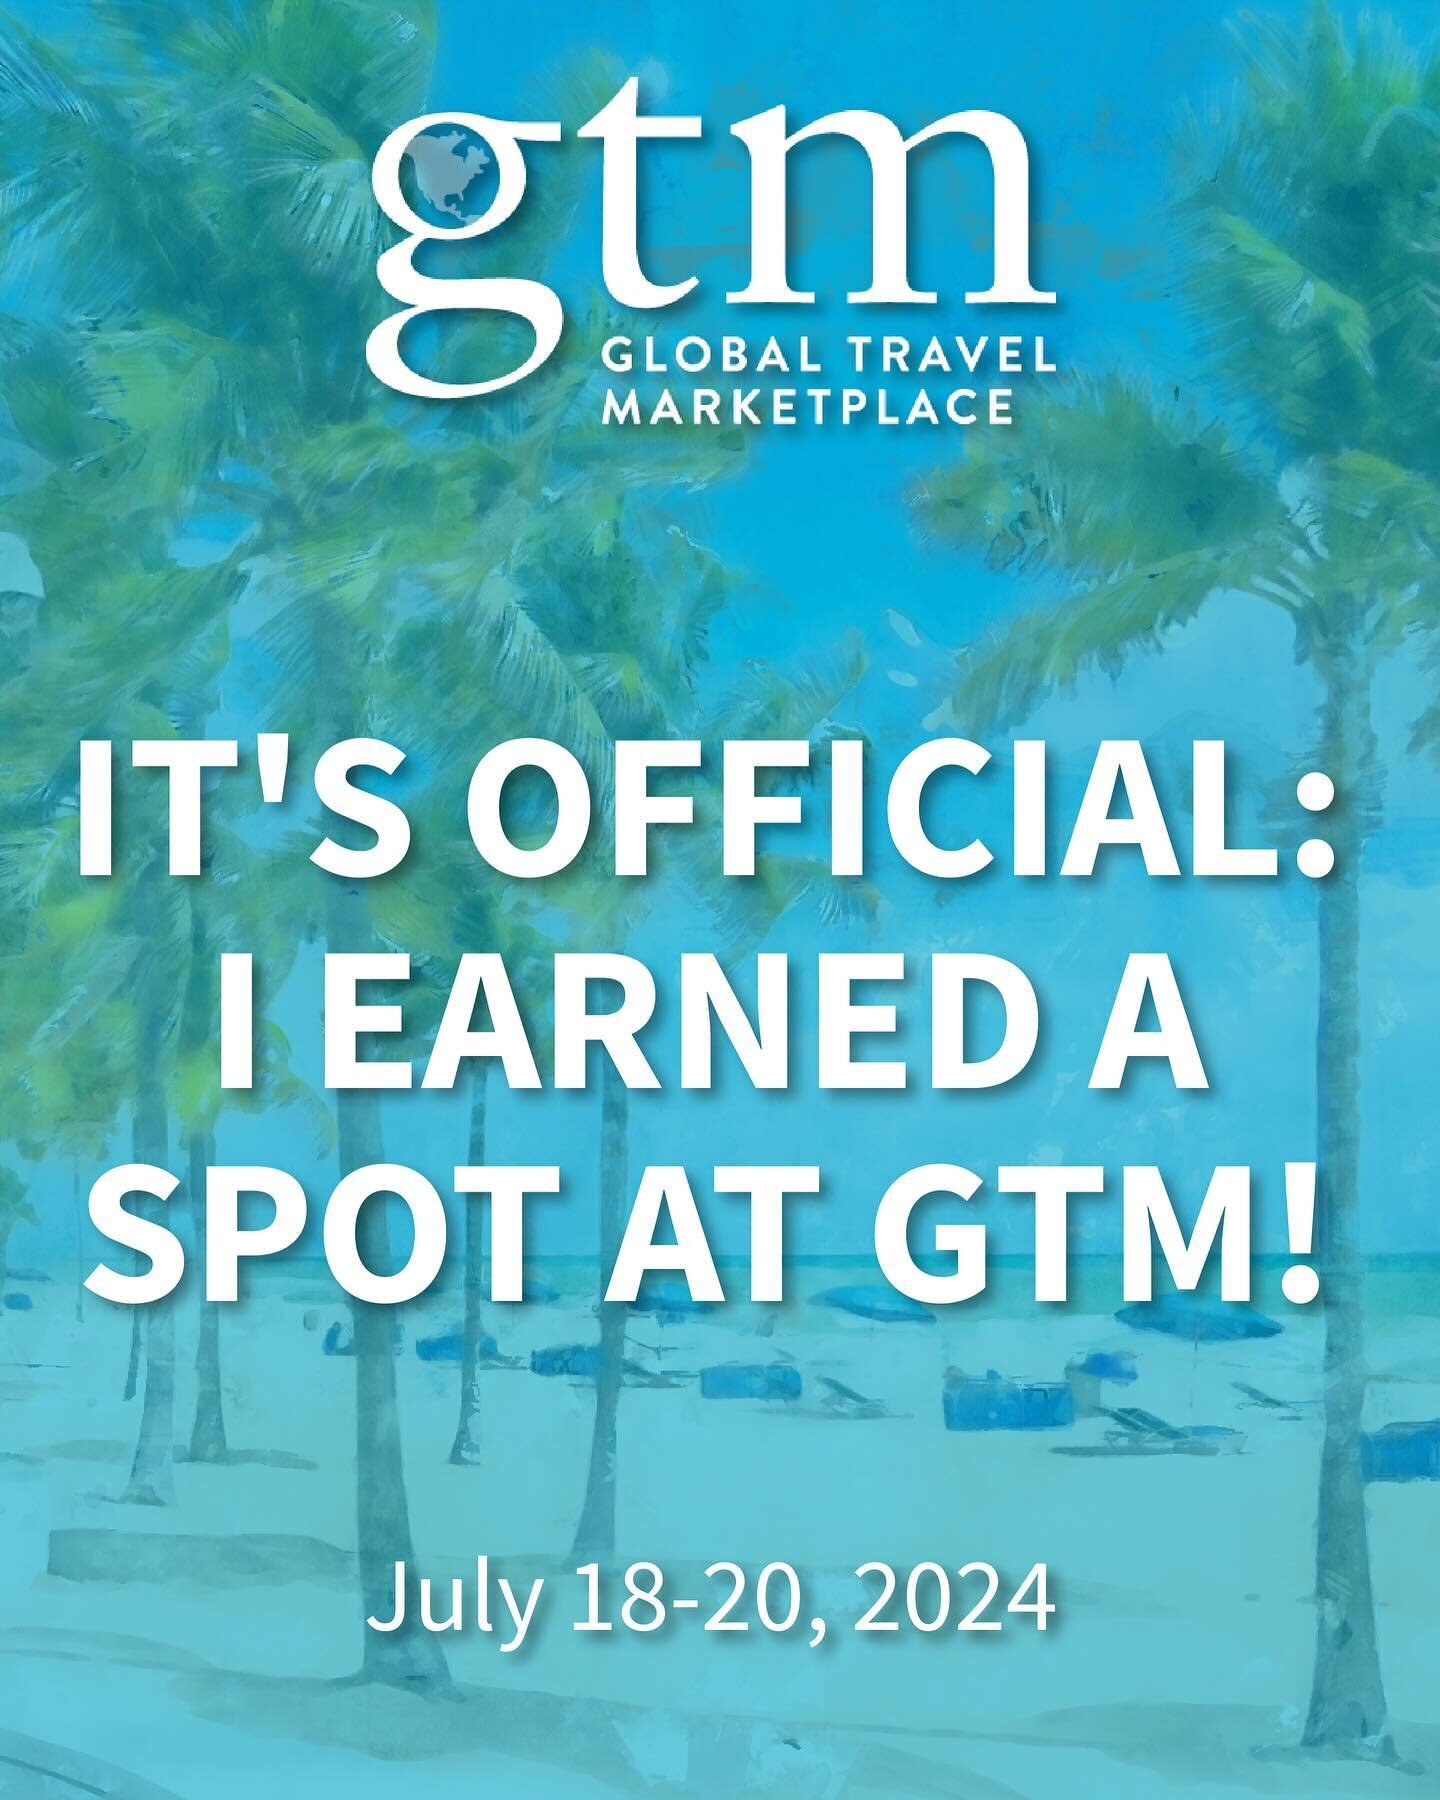 I&rsquo;m thrilled to share that I&rsquo;ve been accepted to attend GTM&mdash;the industry&rsquo;s premier networking event&mdash;taking place in Hollywood, FL from July 18-20! While there, I&rsquo;ll be connecting with suppliers from across the glob